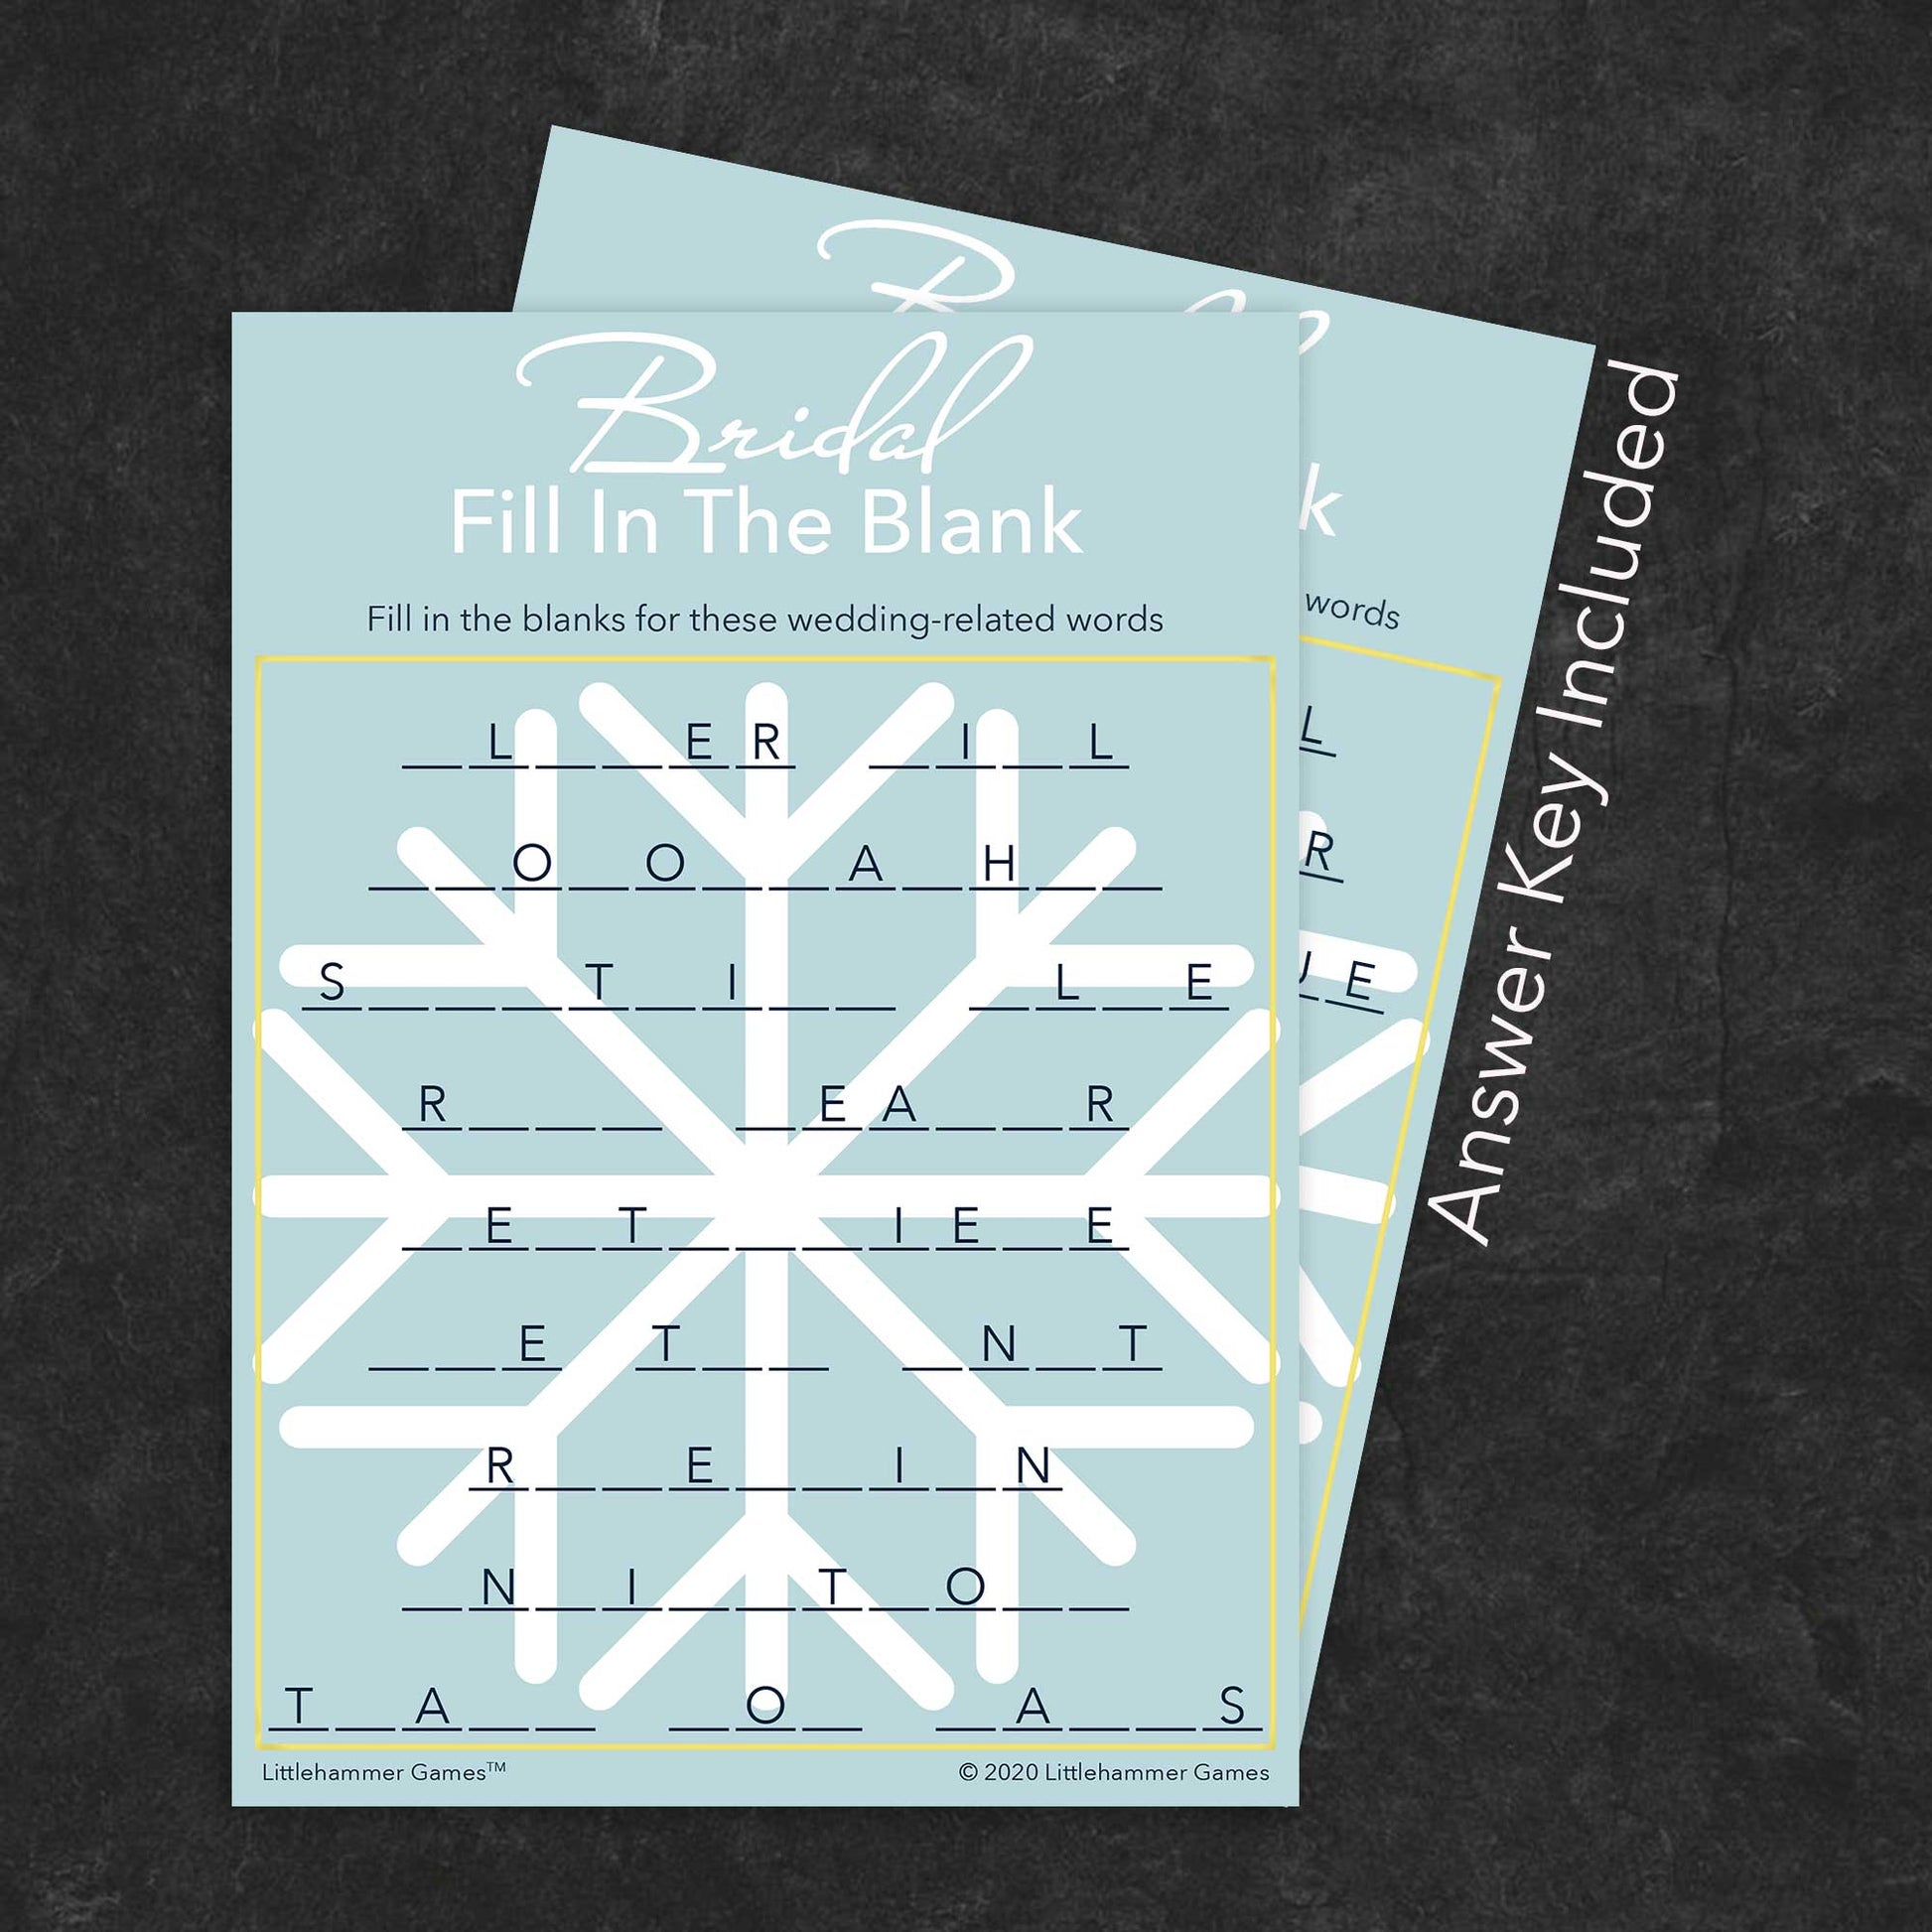 Blue Snowflakes Holographic 8.5X11 Cardstock